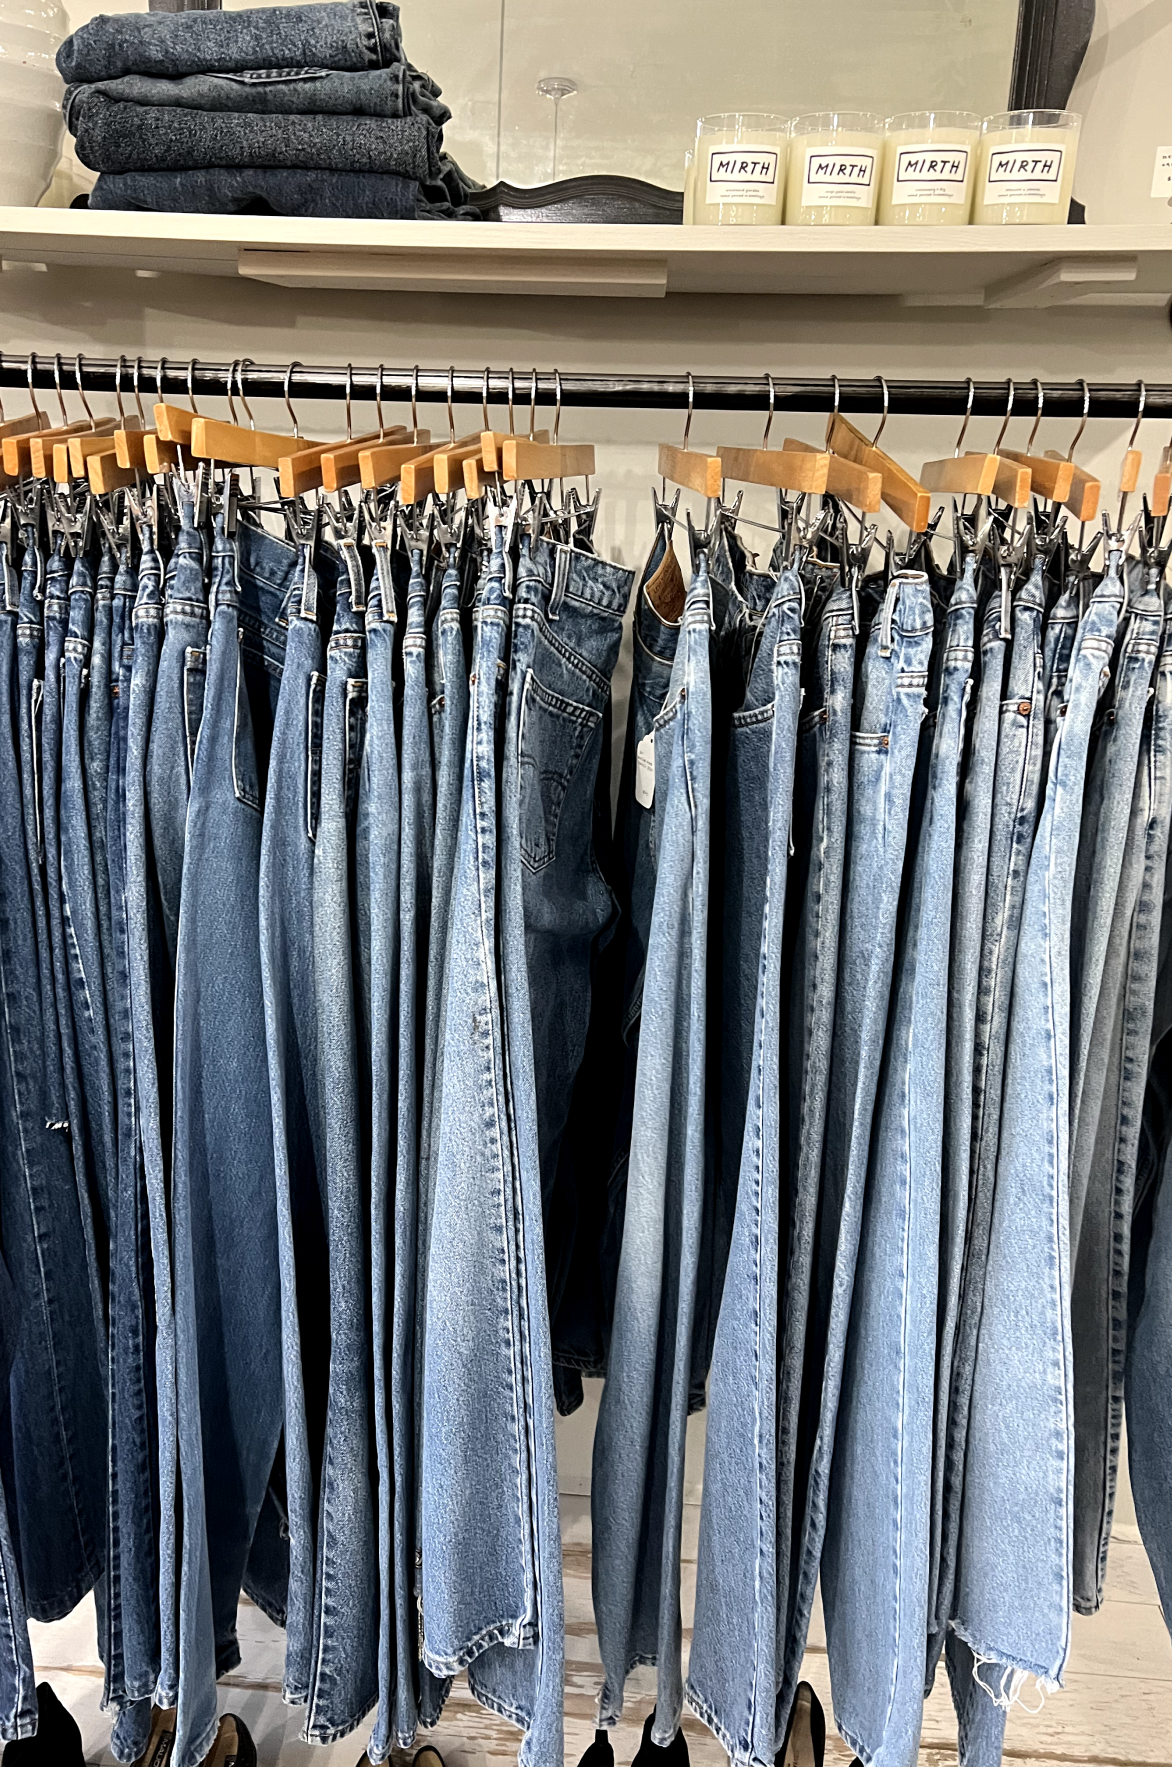 NYC is a wonderful place if you are into vintage shopping and finding the perfect 501 Levi's. Scroll down below to know our favorite spots for treasure hunting 